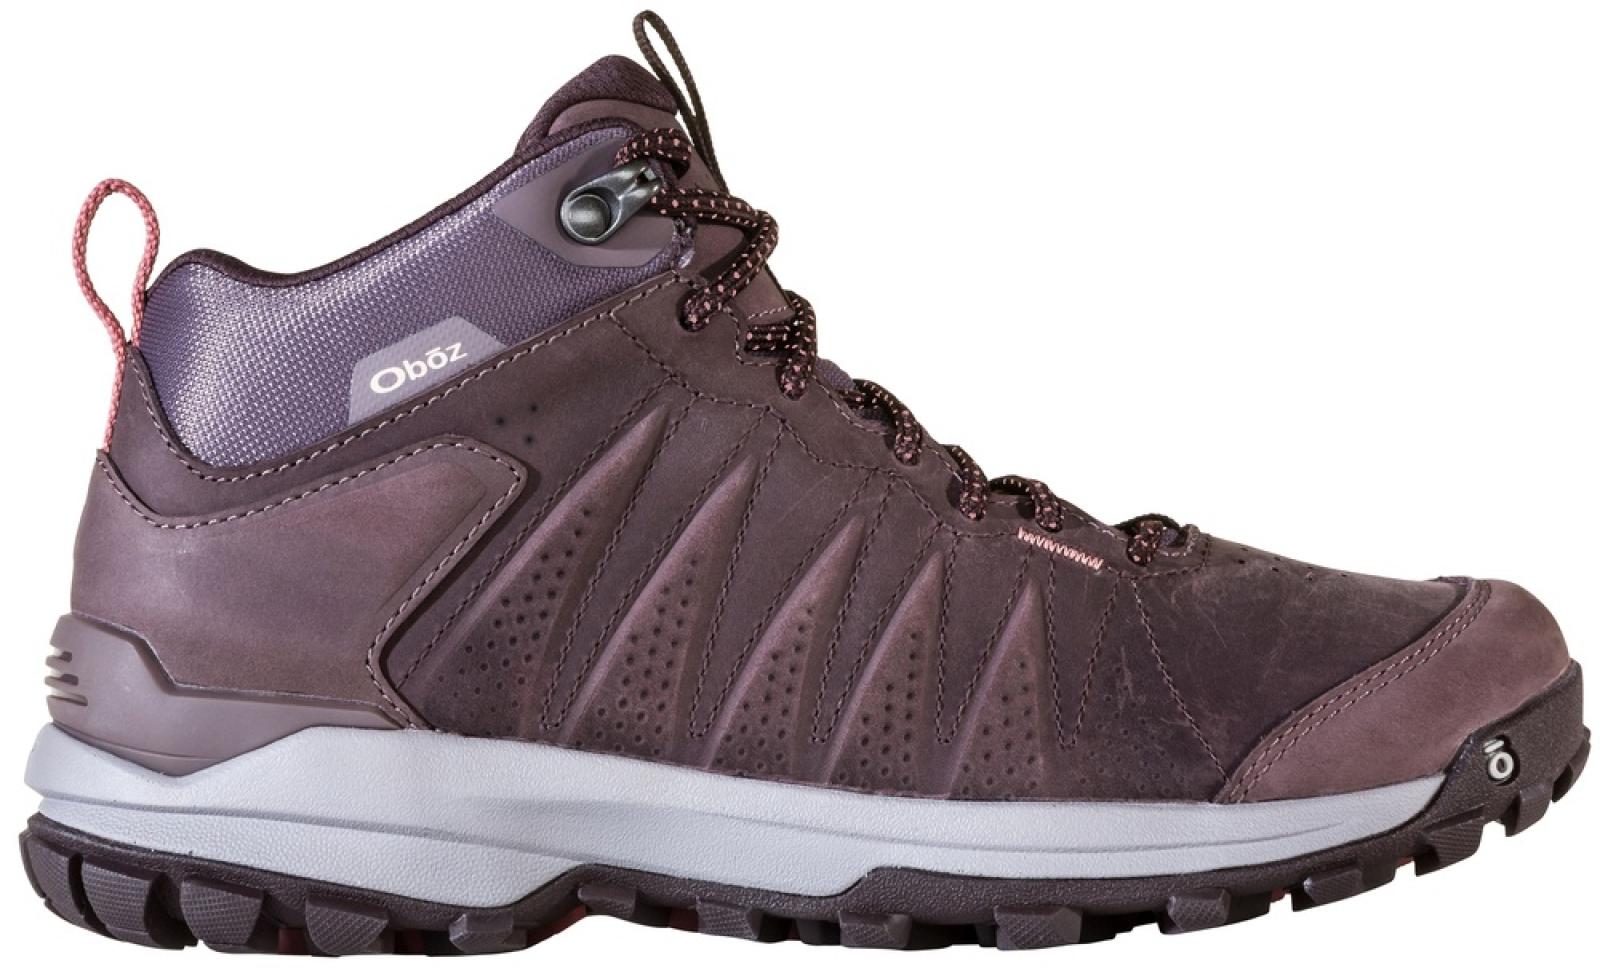 Oboz Sypes Mid Leather Waterproof Hiking Shoe